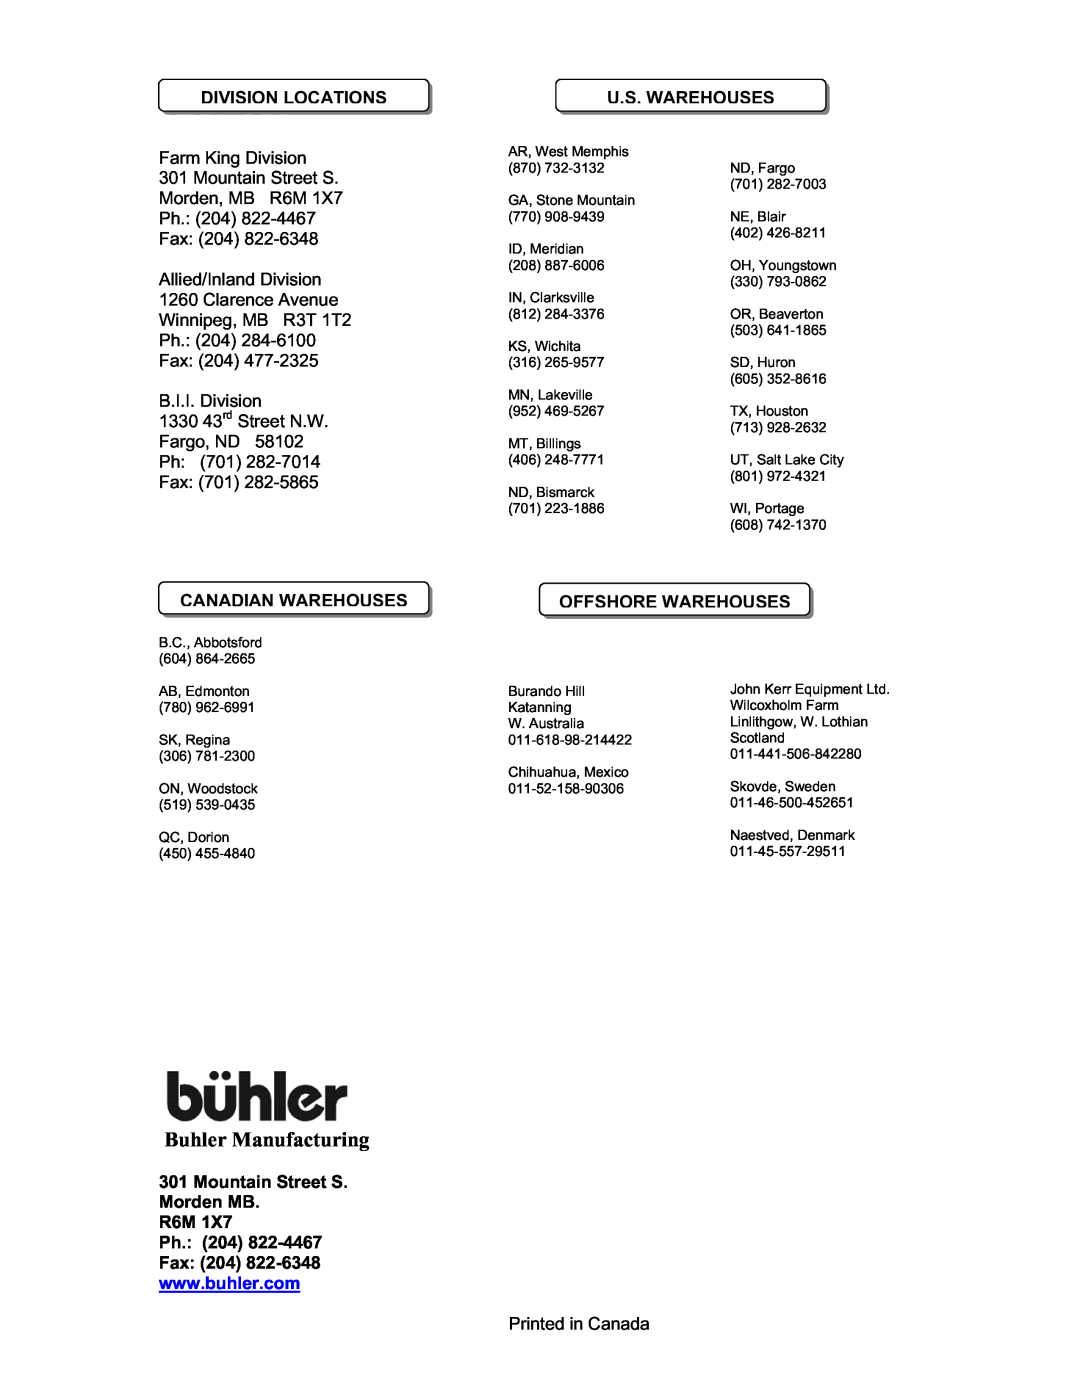 Buhler FK368 Buhler Manufacturing, Division Locations, Farm King Division 301 Mountain Street S Morden, MB R6M Ph. 204 